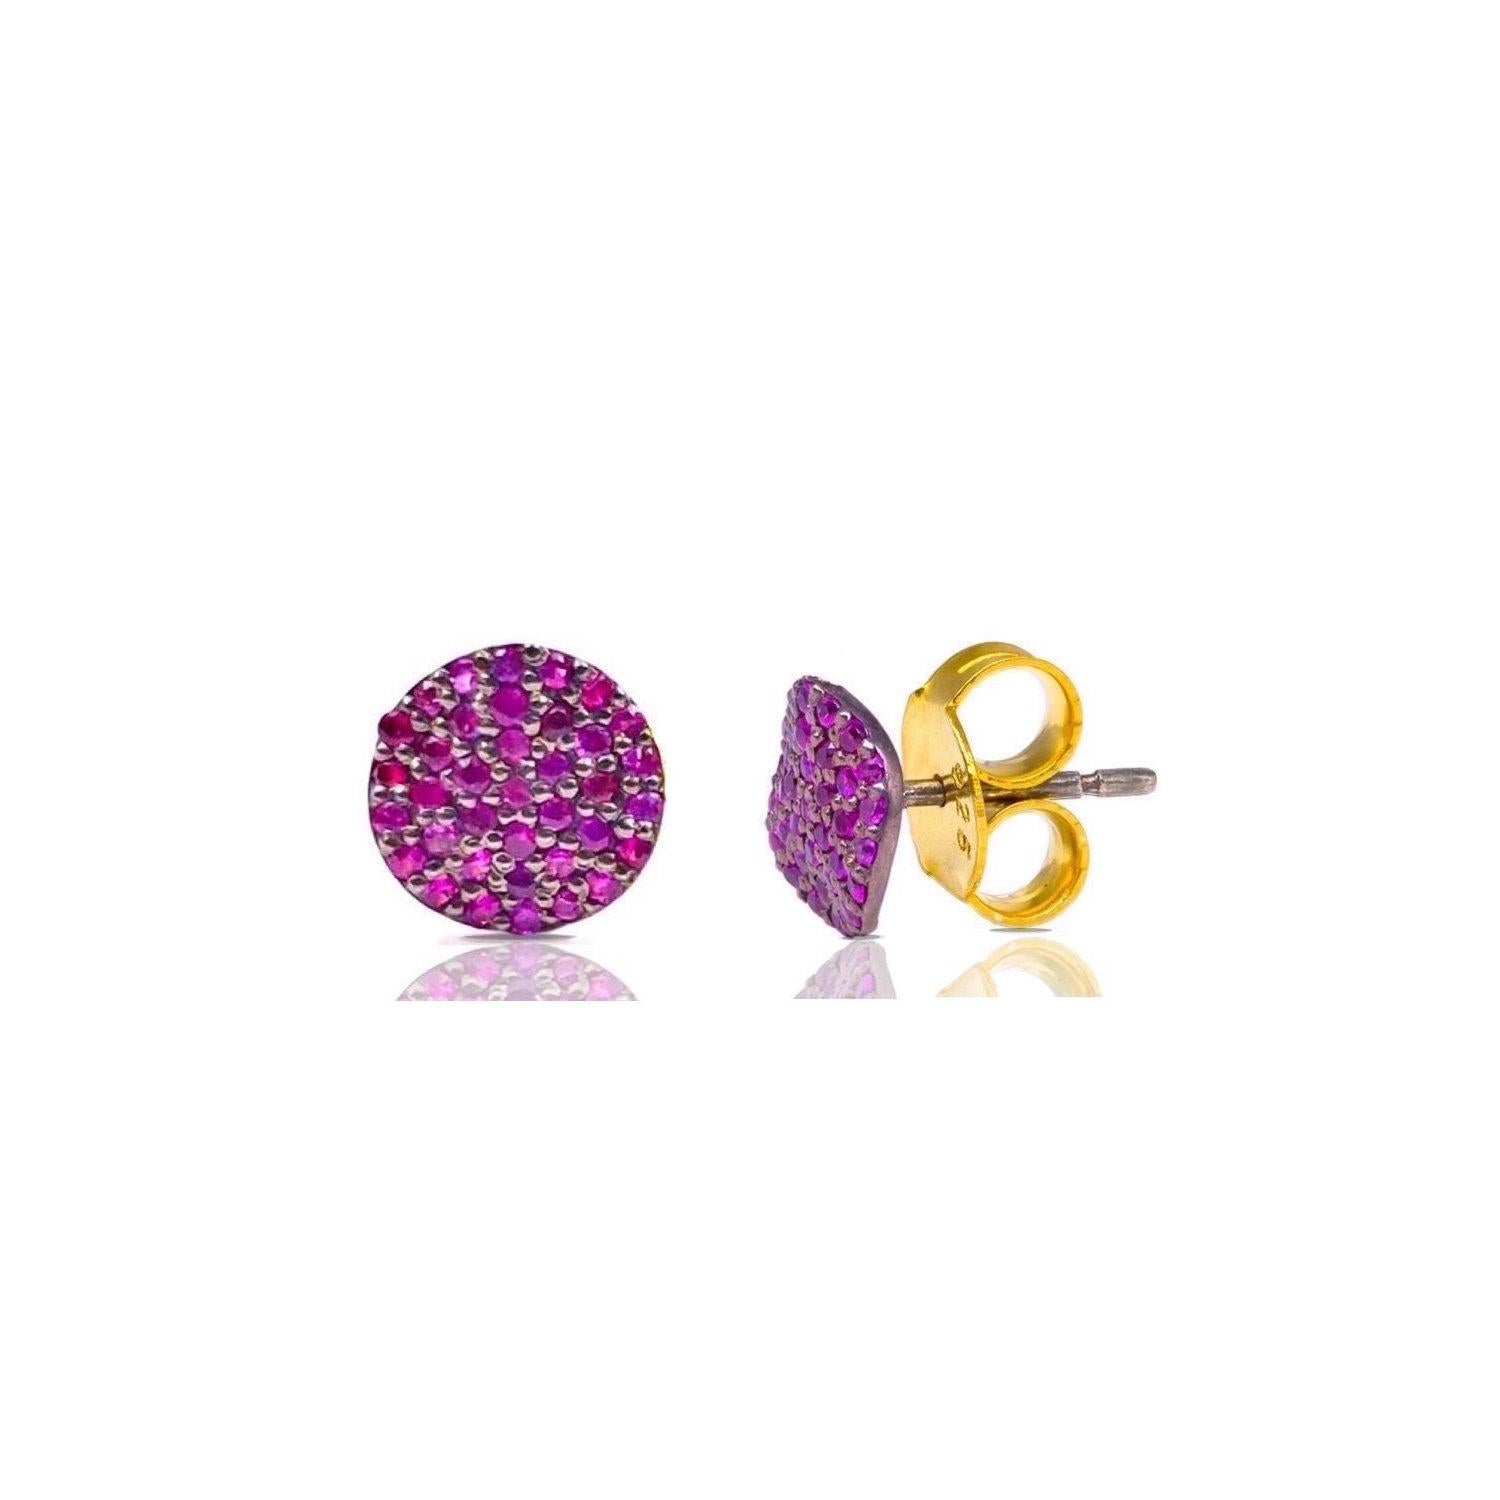 Fiery pink Rubies set into stylish stud earrings in a contemporary wave design of blackened silver with gold accents.

- Natural Pink Rubies weight approx .82 Carats.
- Set in Blackened Oxidized Silver with 22 Karat Gold accents.
- For pierced ears.